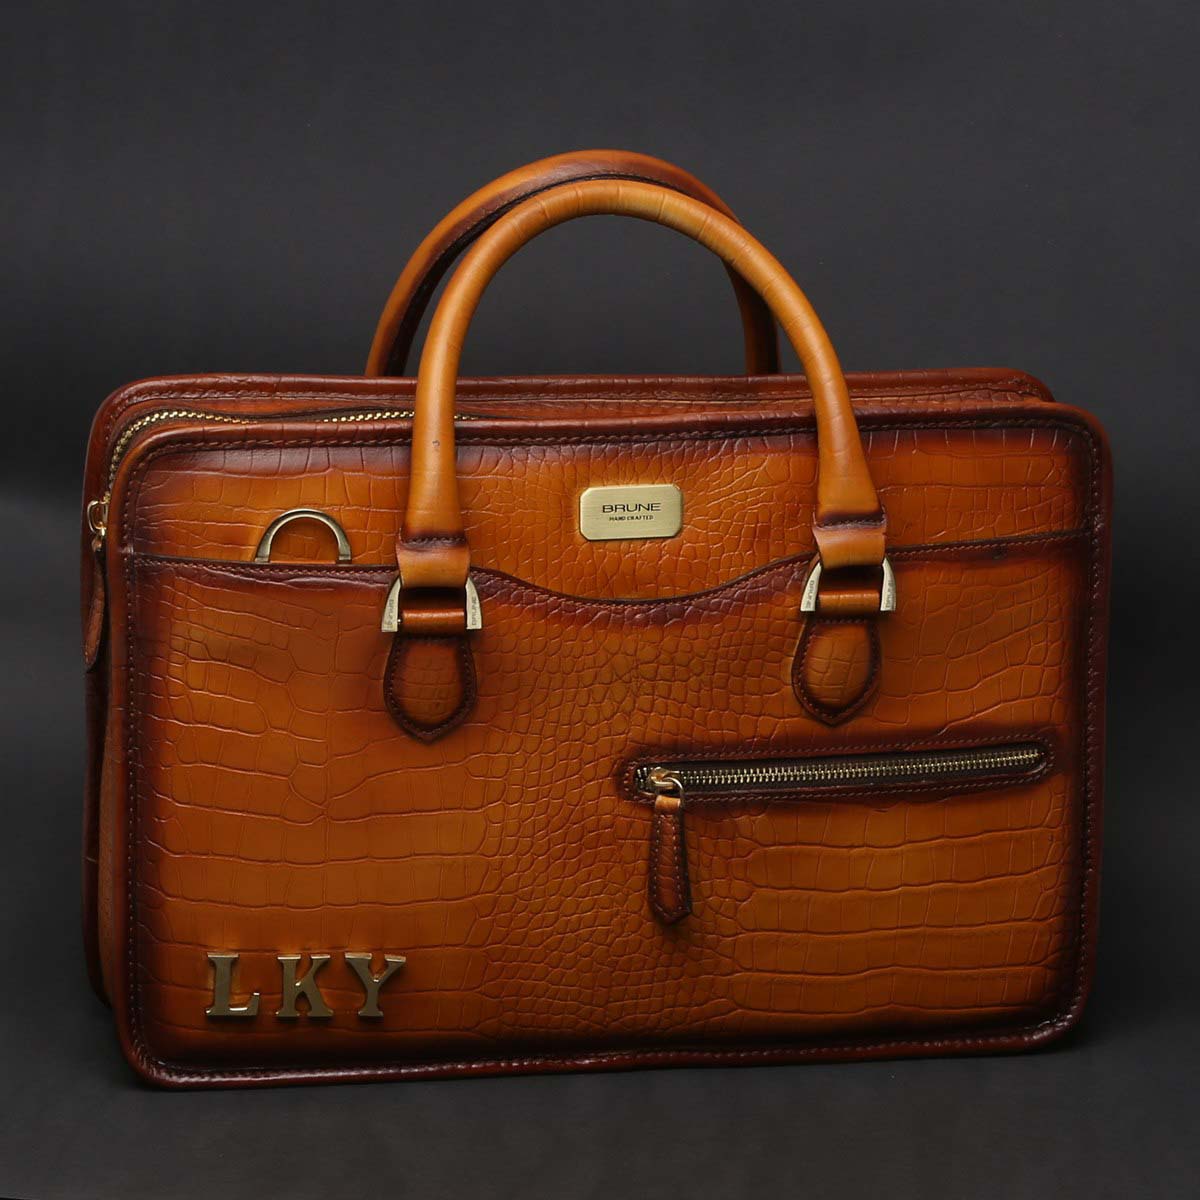 LKY Gold Metal Initial Crafted On Tan Leather Laptop Bag by Brune & Bareskin